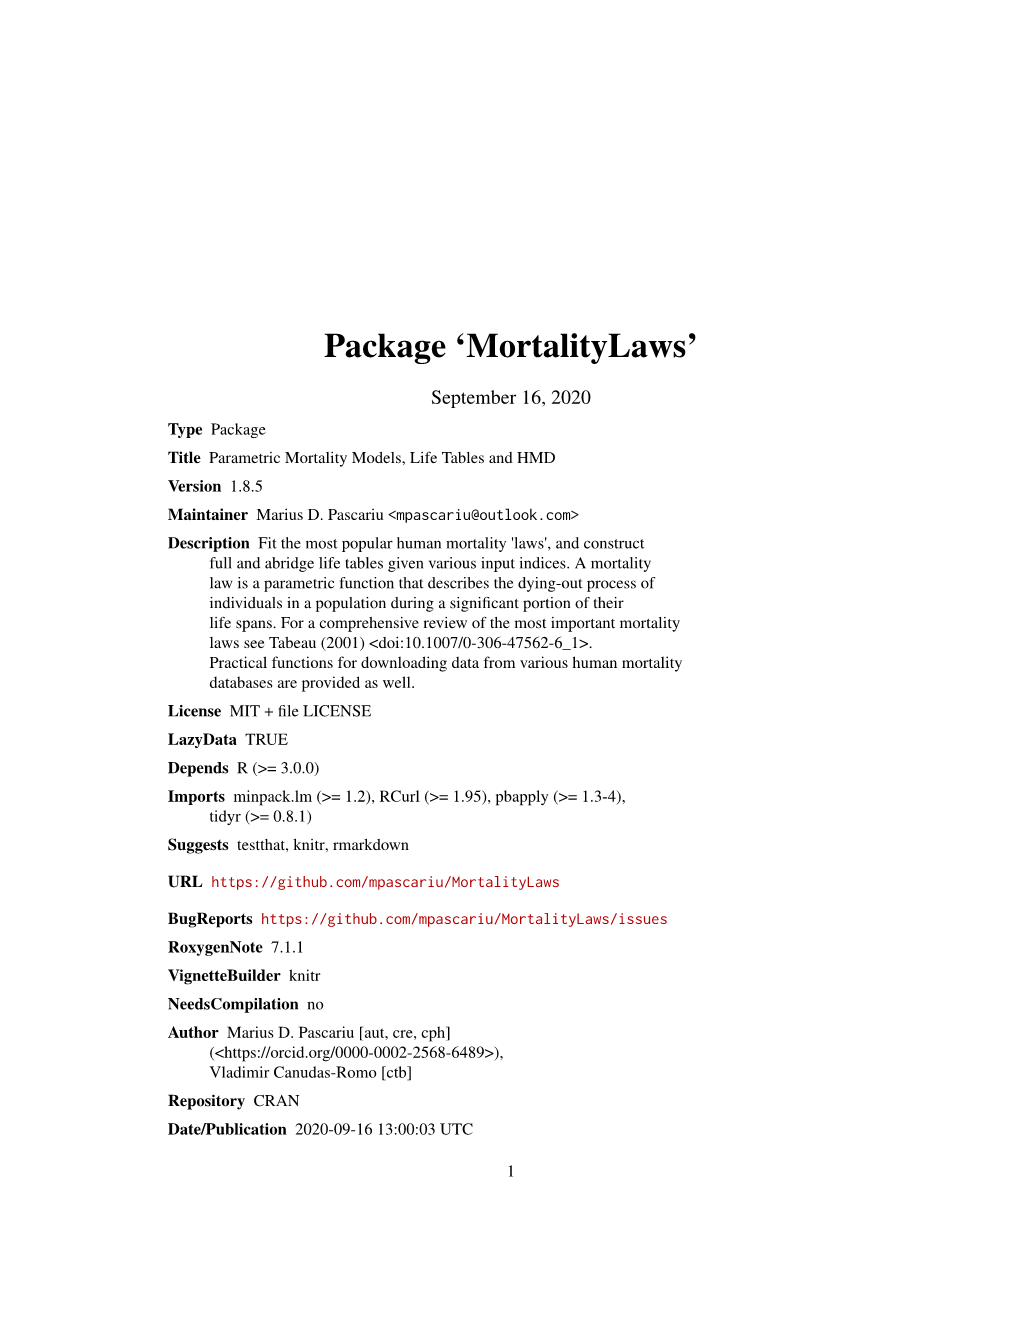 Package 'Mortalitylaws'